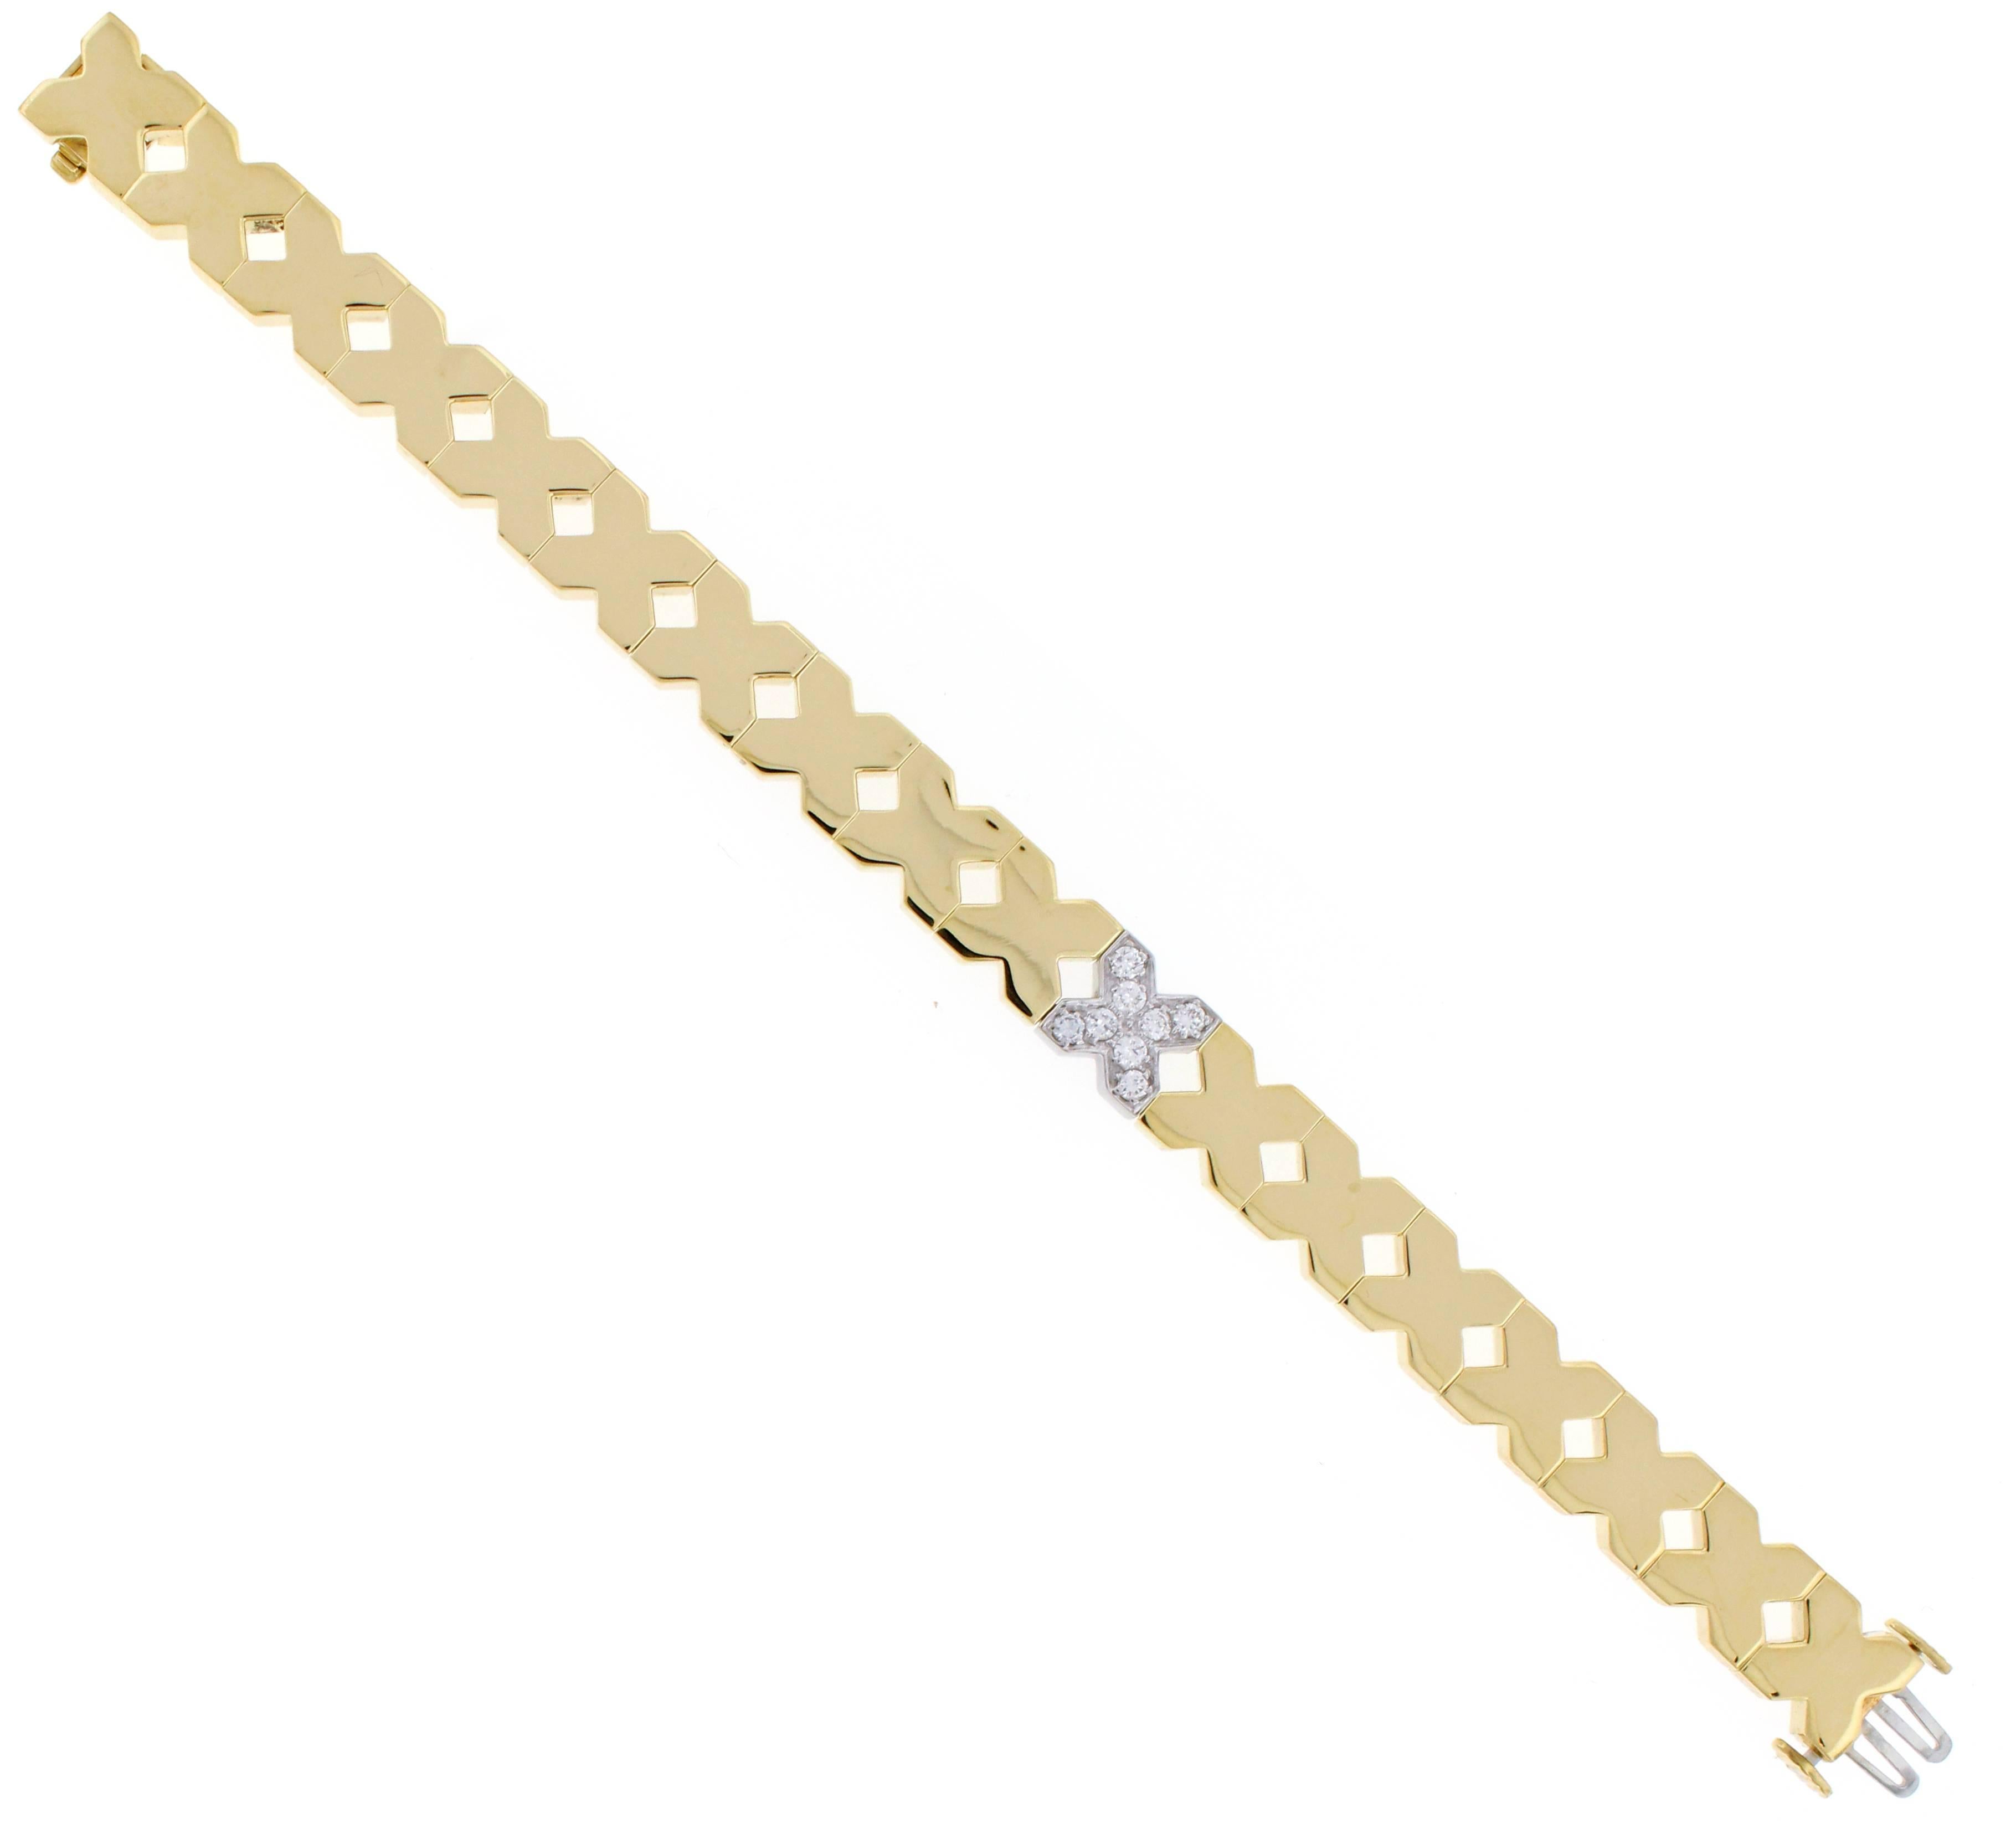 Bold gold X motif links and single diamond X makes this bracelet by Tiffany & Co stylish and sophisticated. Eight  diamonds weigh .40 carats.   6 3/4 inches long. May Be lengthened.